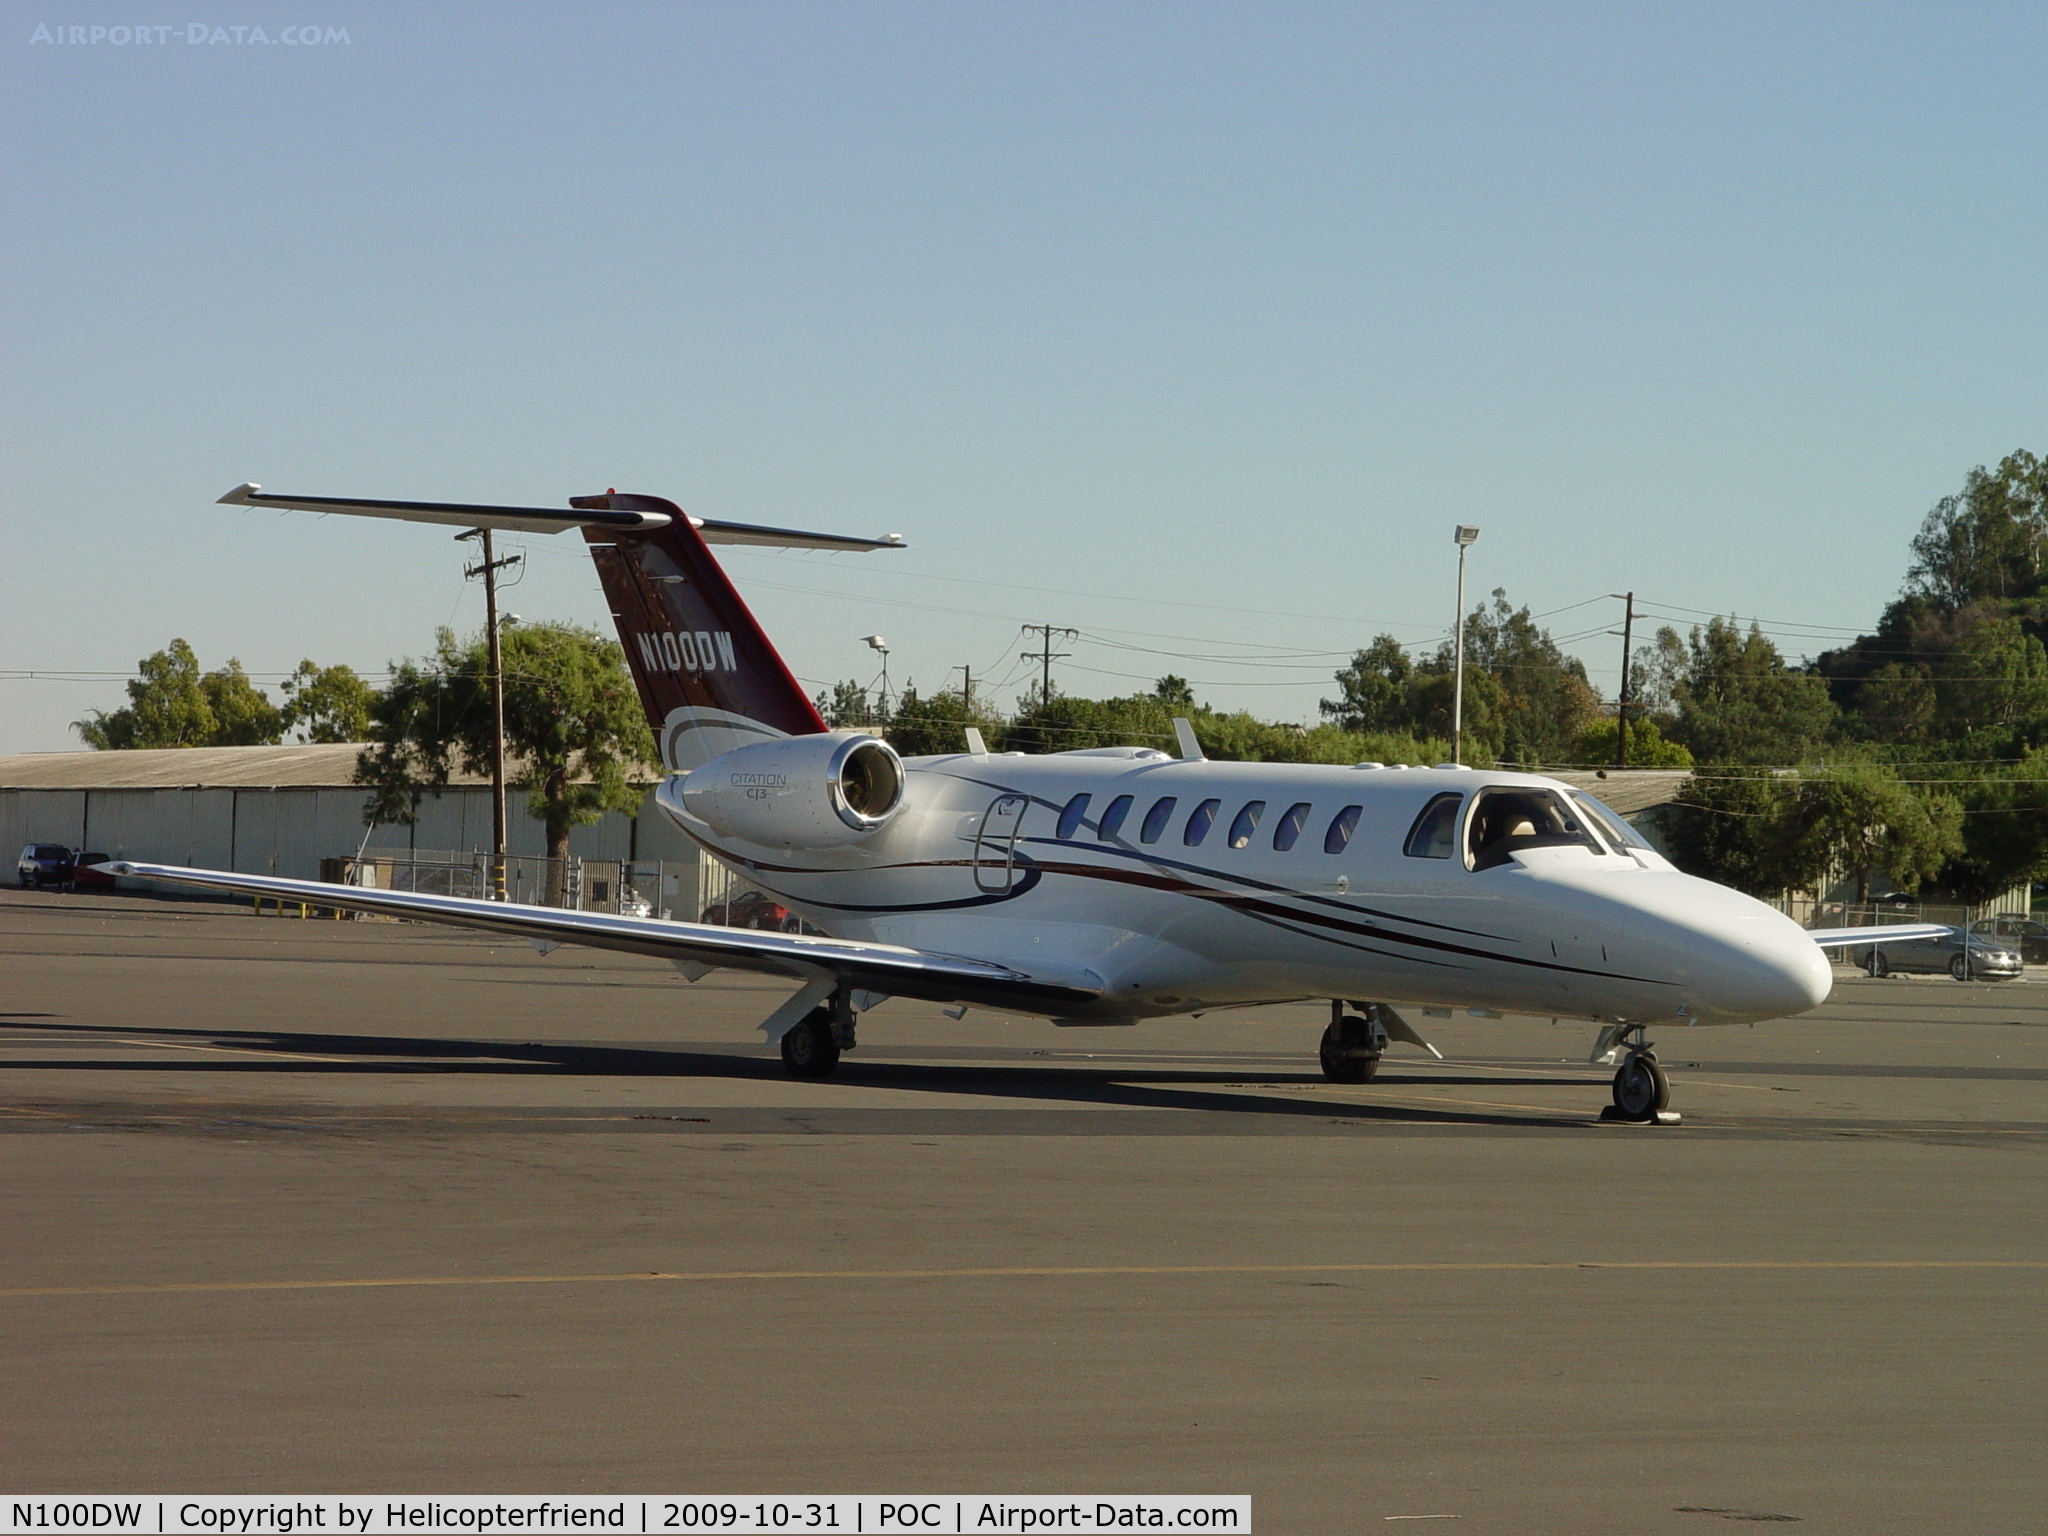 N100DW, 2008 Cessna 525B CitationJet CJ3 C/N 525B-0261, Parked in Transient Parking awaiting crew and passengers